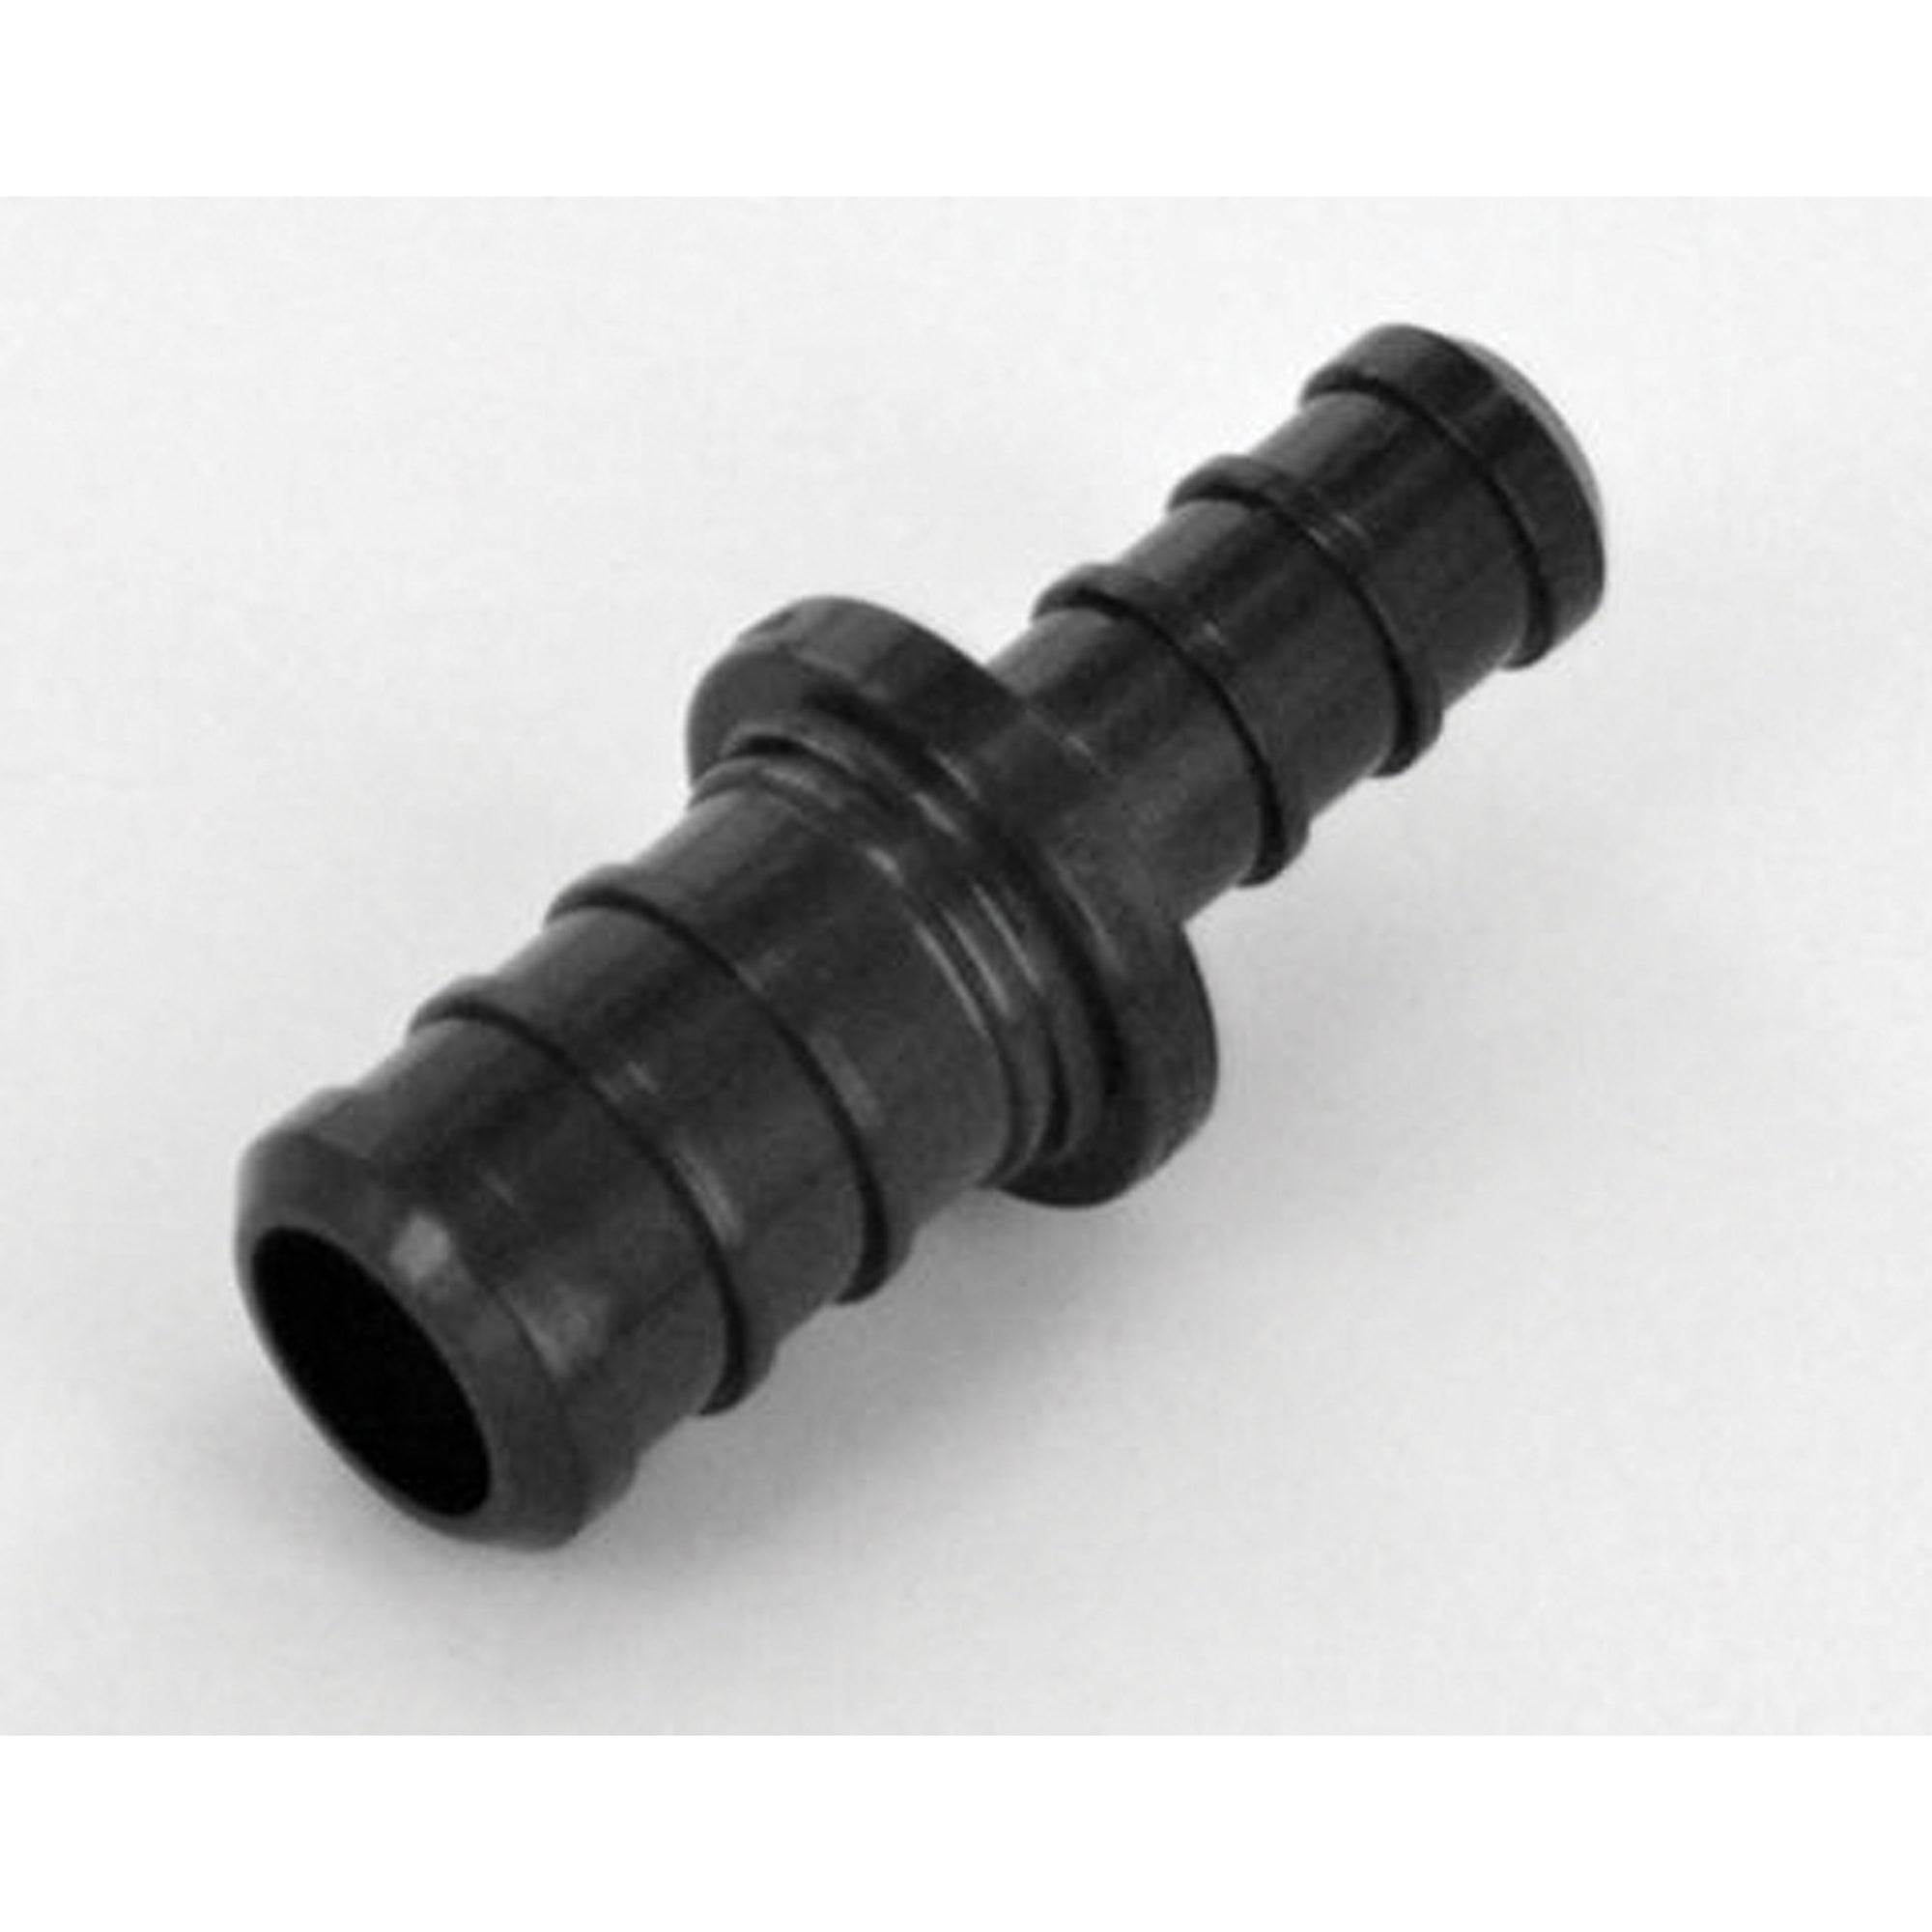 Flair-It 29845 1/2" X 3/4" Coupling